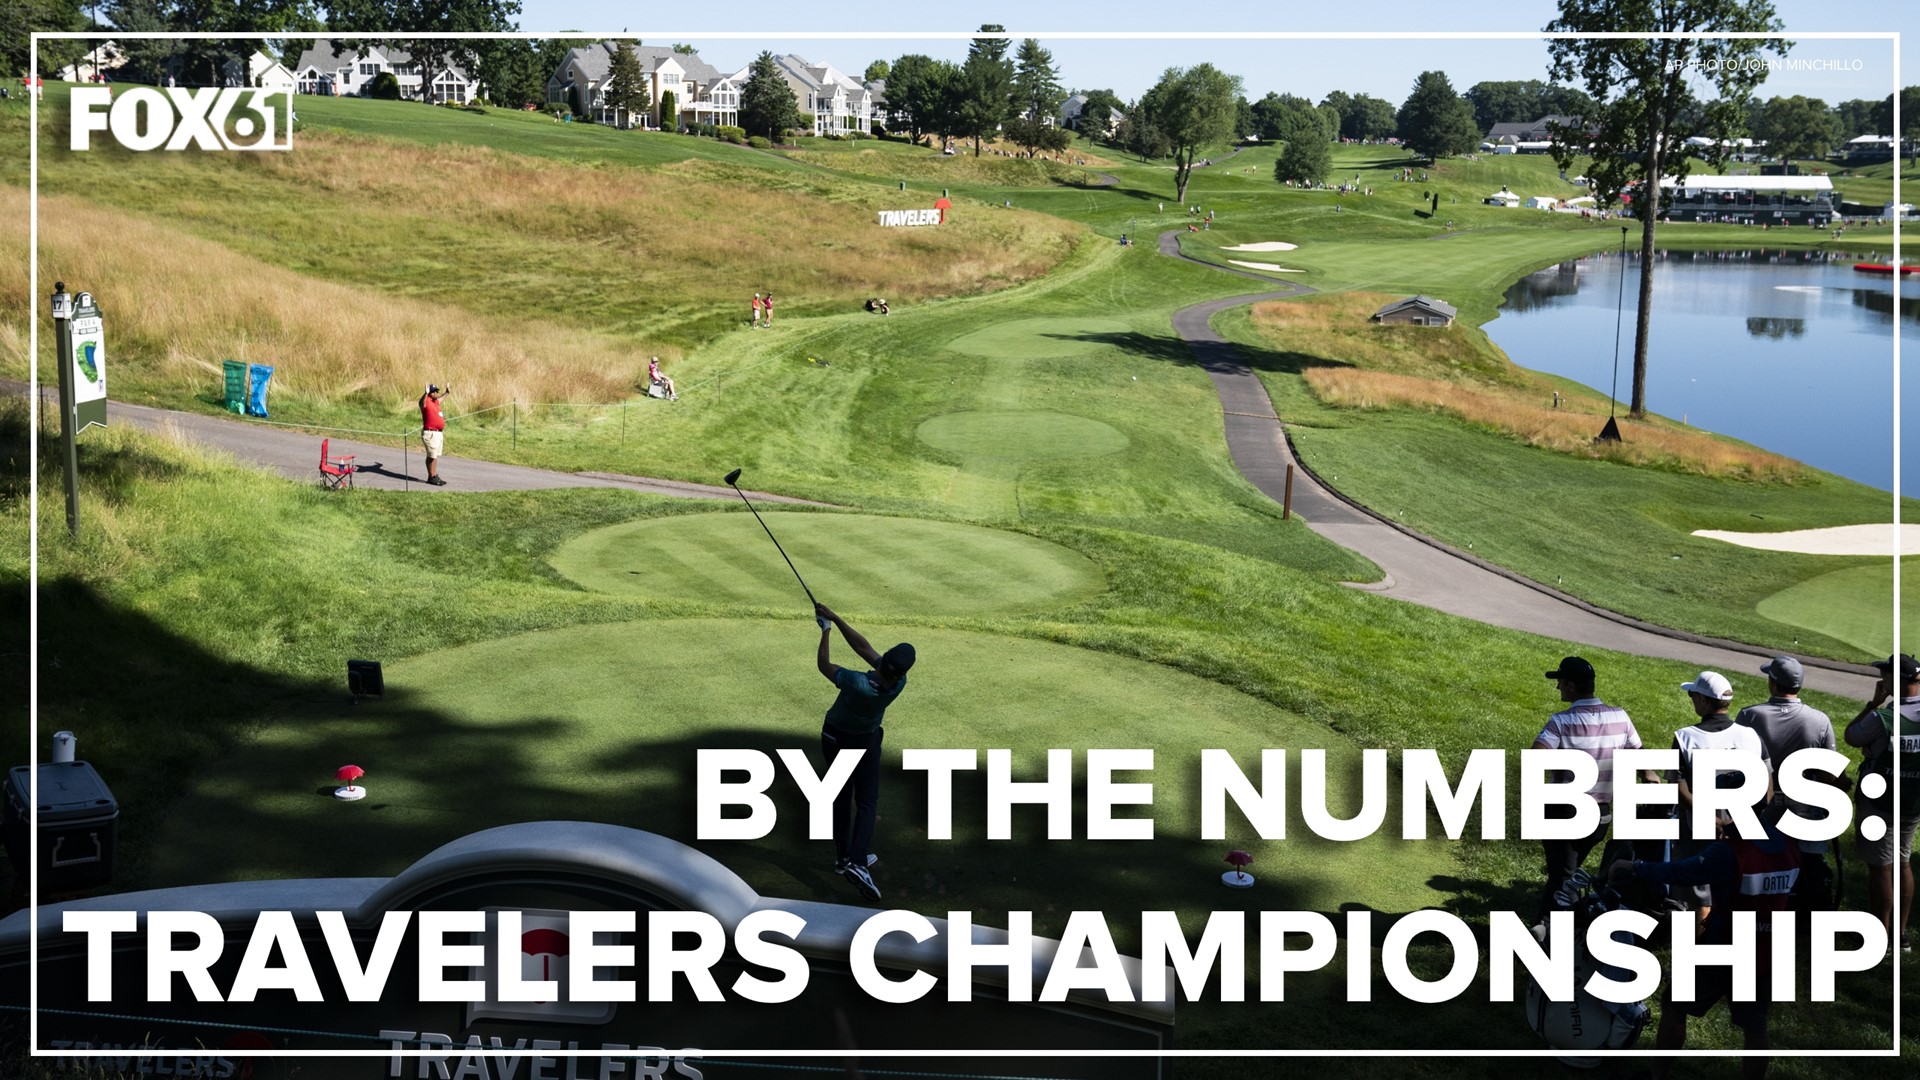 It's time to tee off once again in Cromwell for the Travelers Championship at TPC River Highlands.